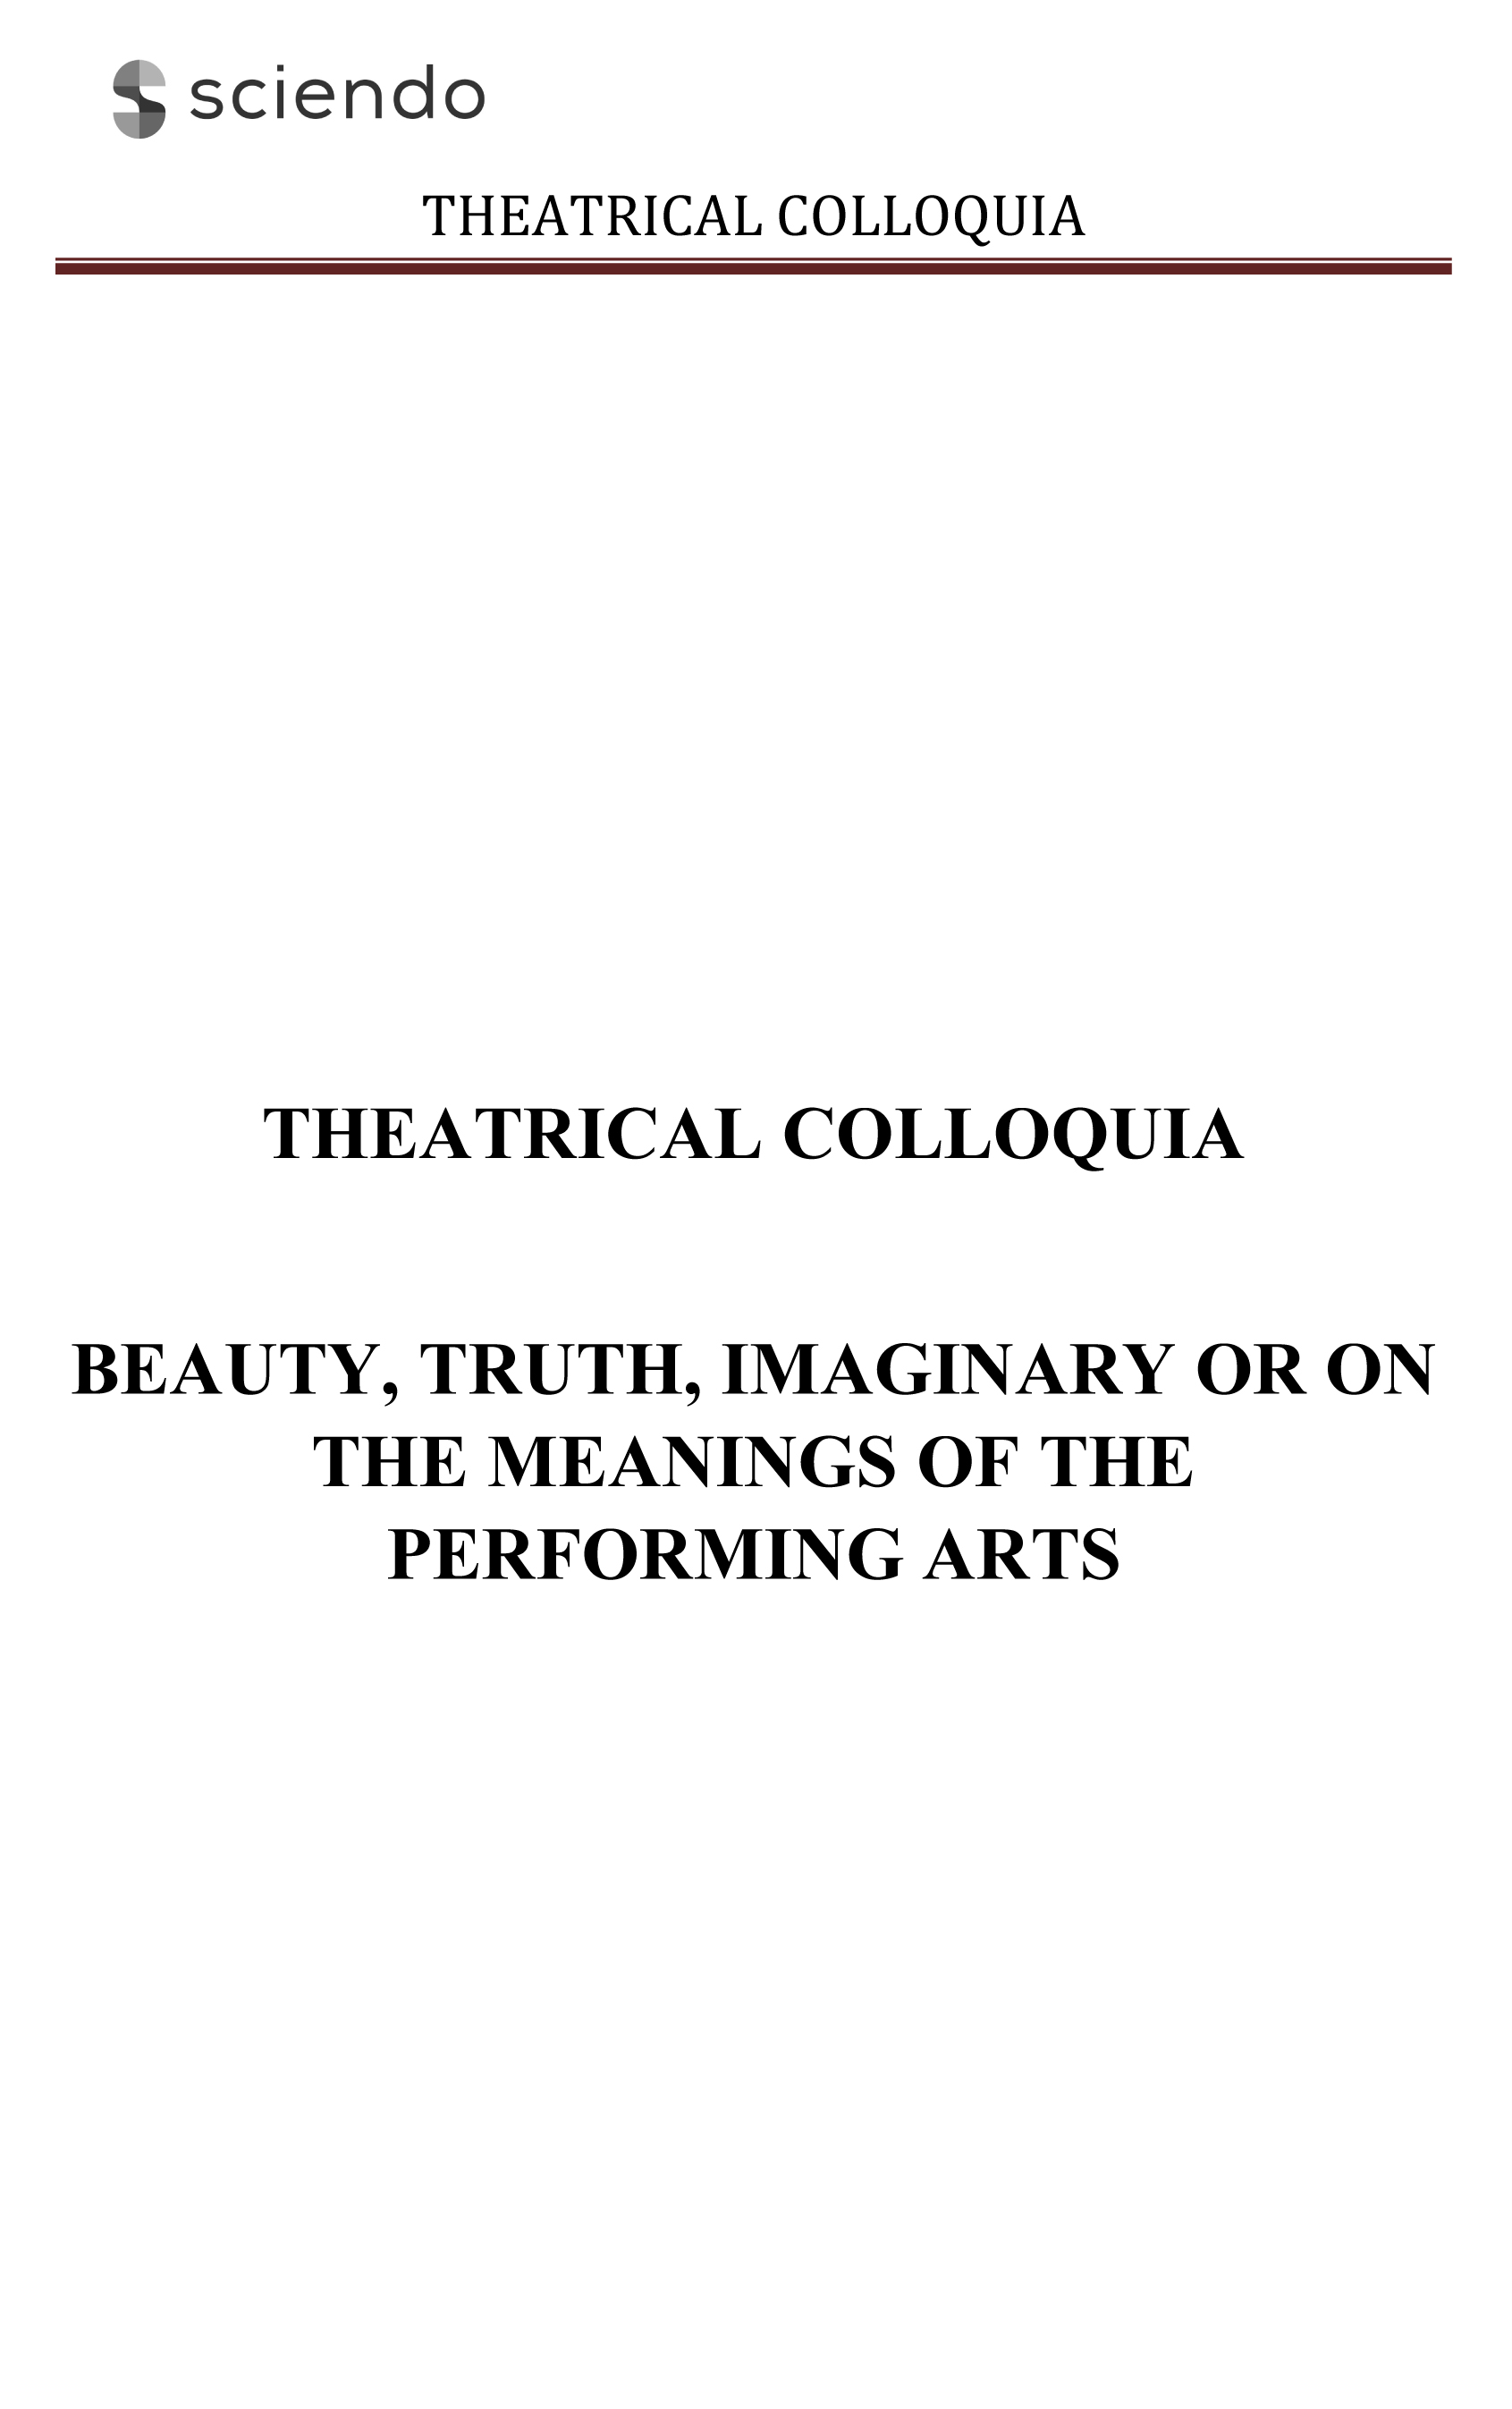 The Effects of the COVID-19 Pandemic on the Body Perception of the Actor in Theatre Performance Cover Image